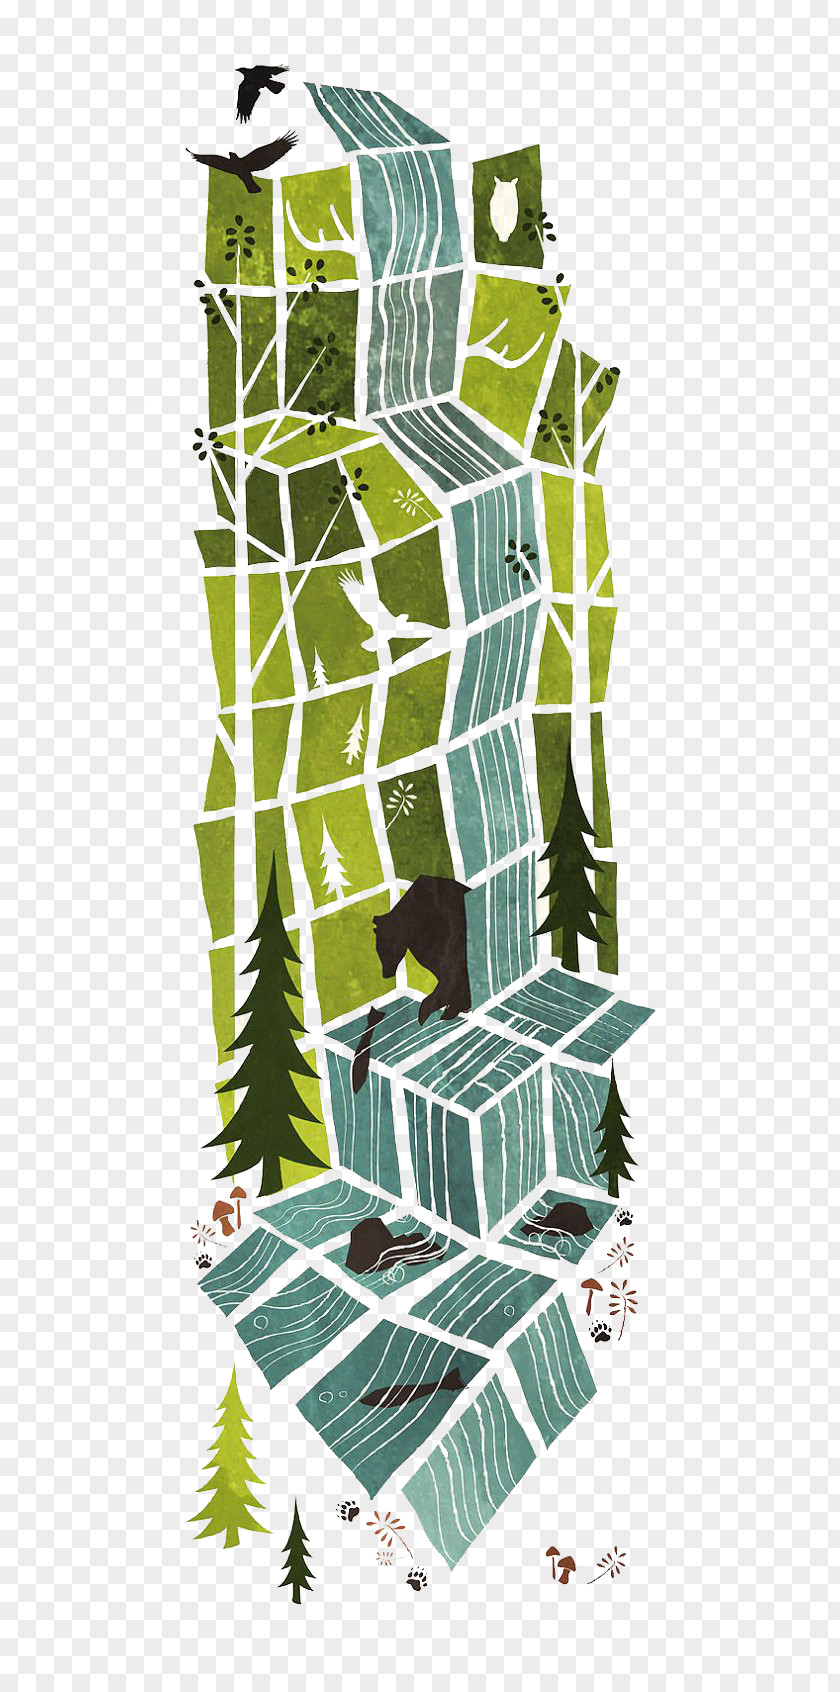 Forest Drawing Idea Graphic Design Illustration PNG